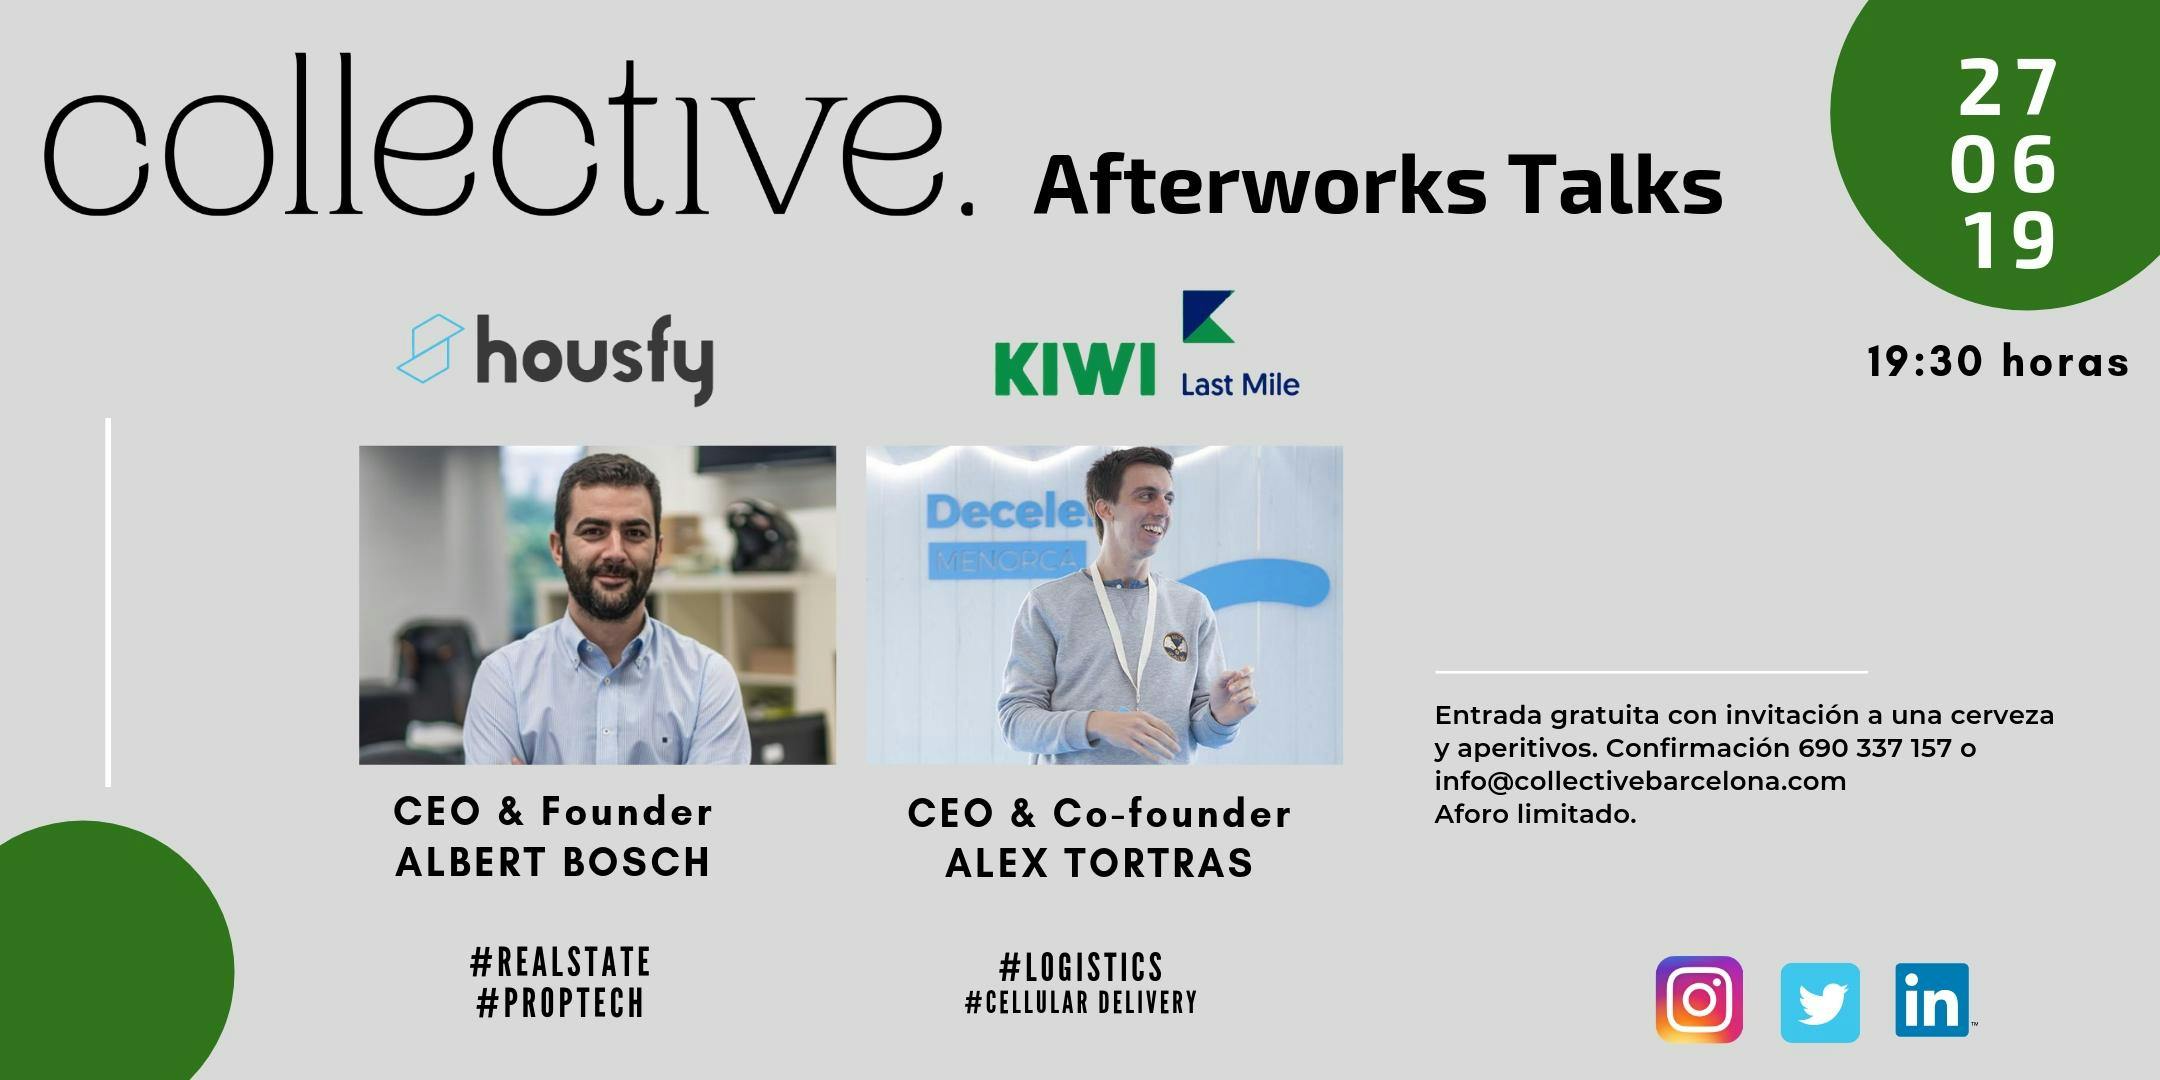 Collective Afterworks Talks